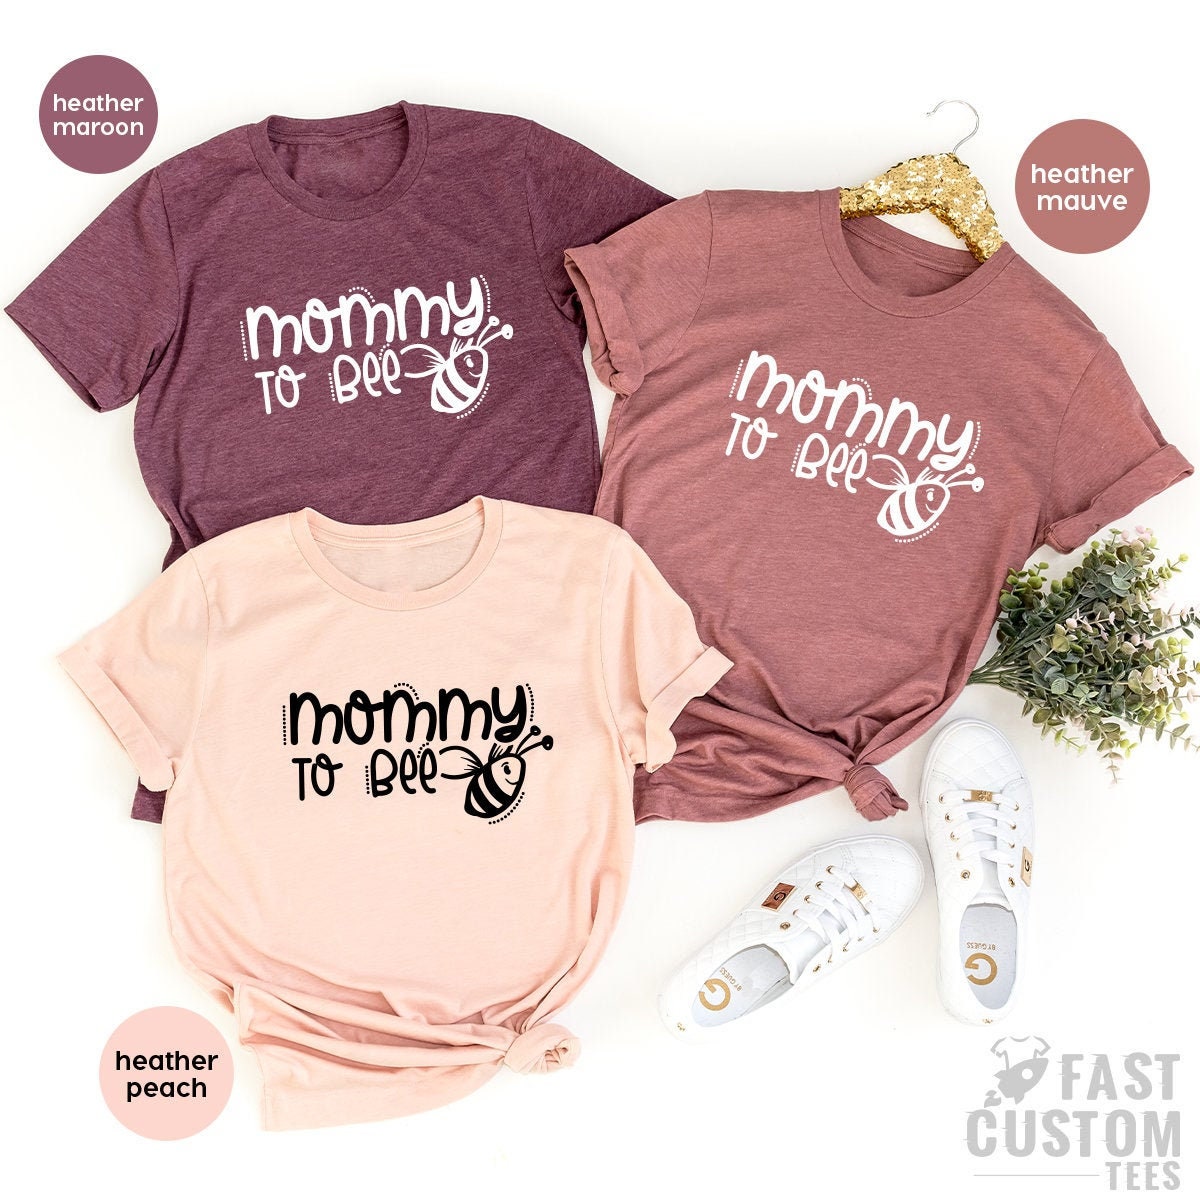 Mommy To Bee Shirt, Baby Announcement Shirt, Pregnancy Reveal Tee, Pregnant T Shirts, Mom To Be T Shirt, New Mama Gift, Gift For New Mom - Fastdeliverytees.com